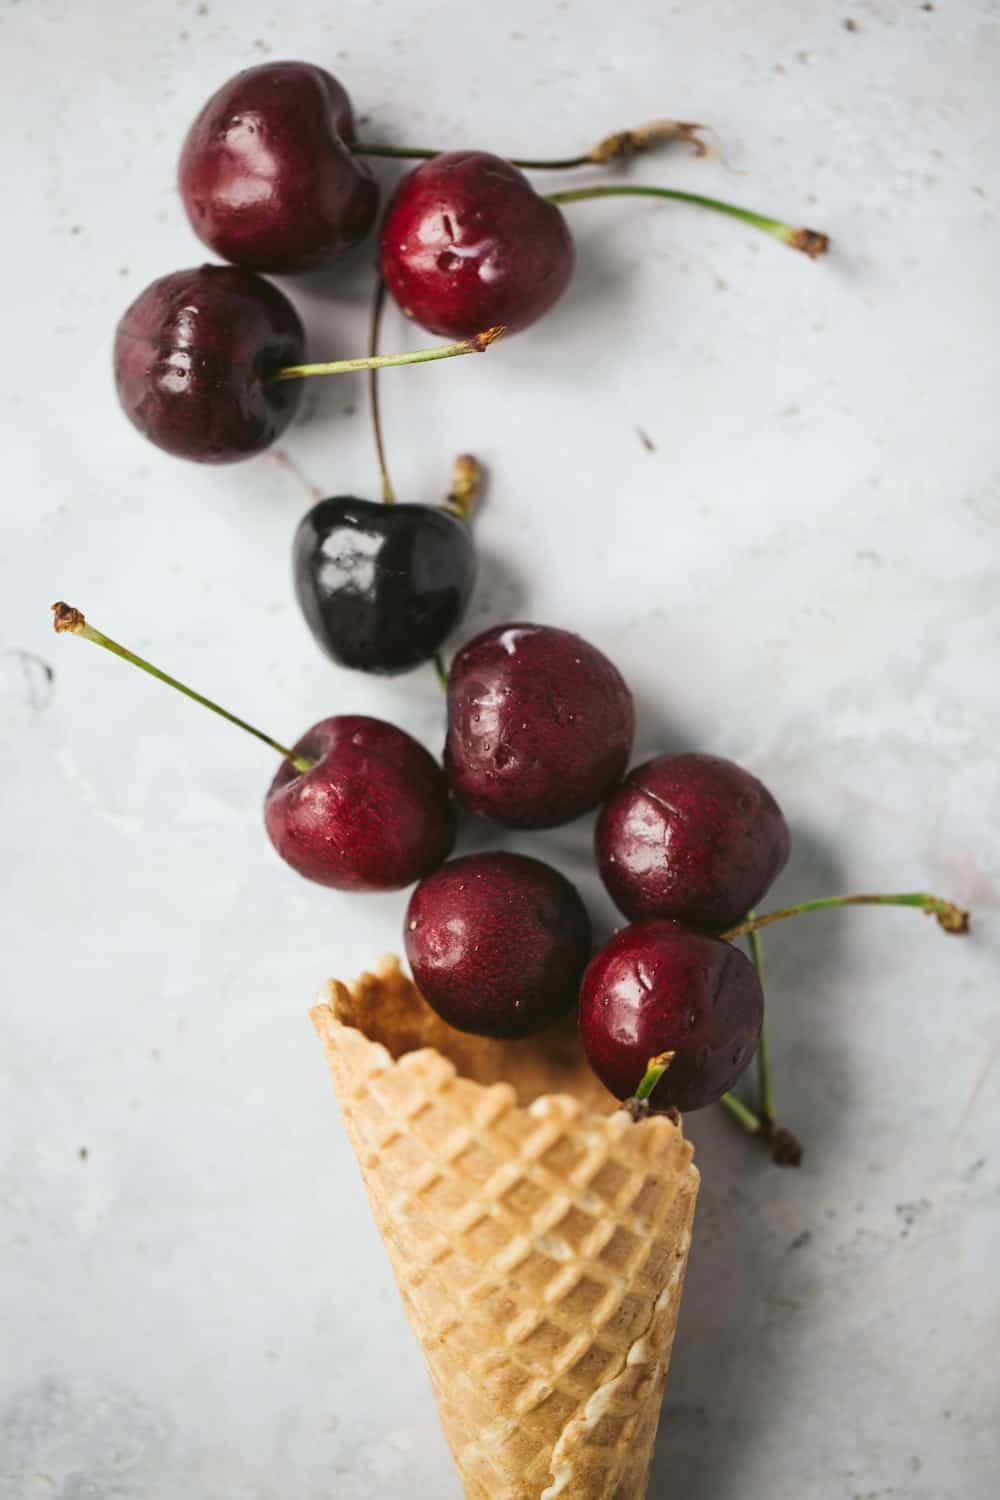 Plump and juicy black cherries, the perfect summertime treat! Wallpaper